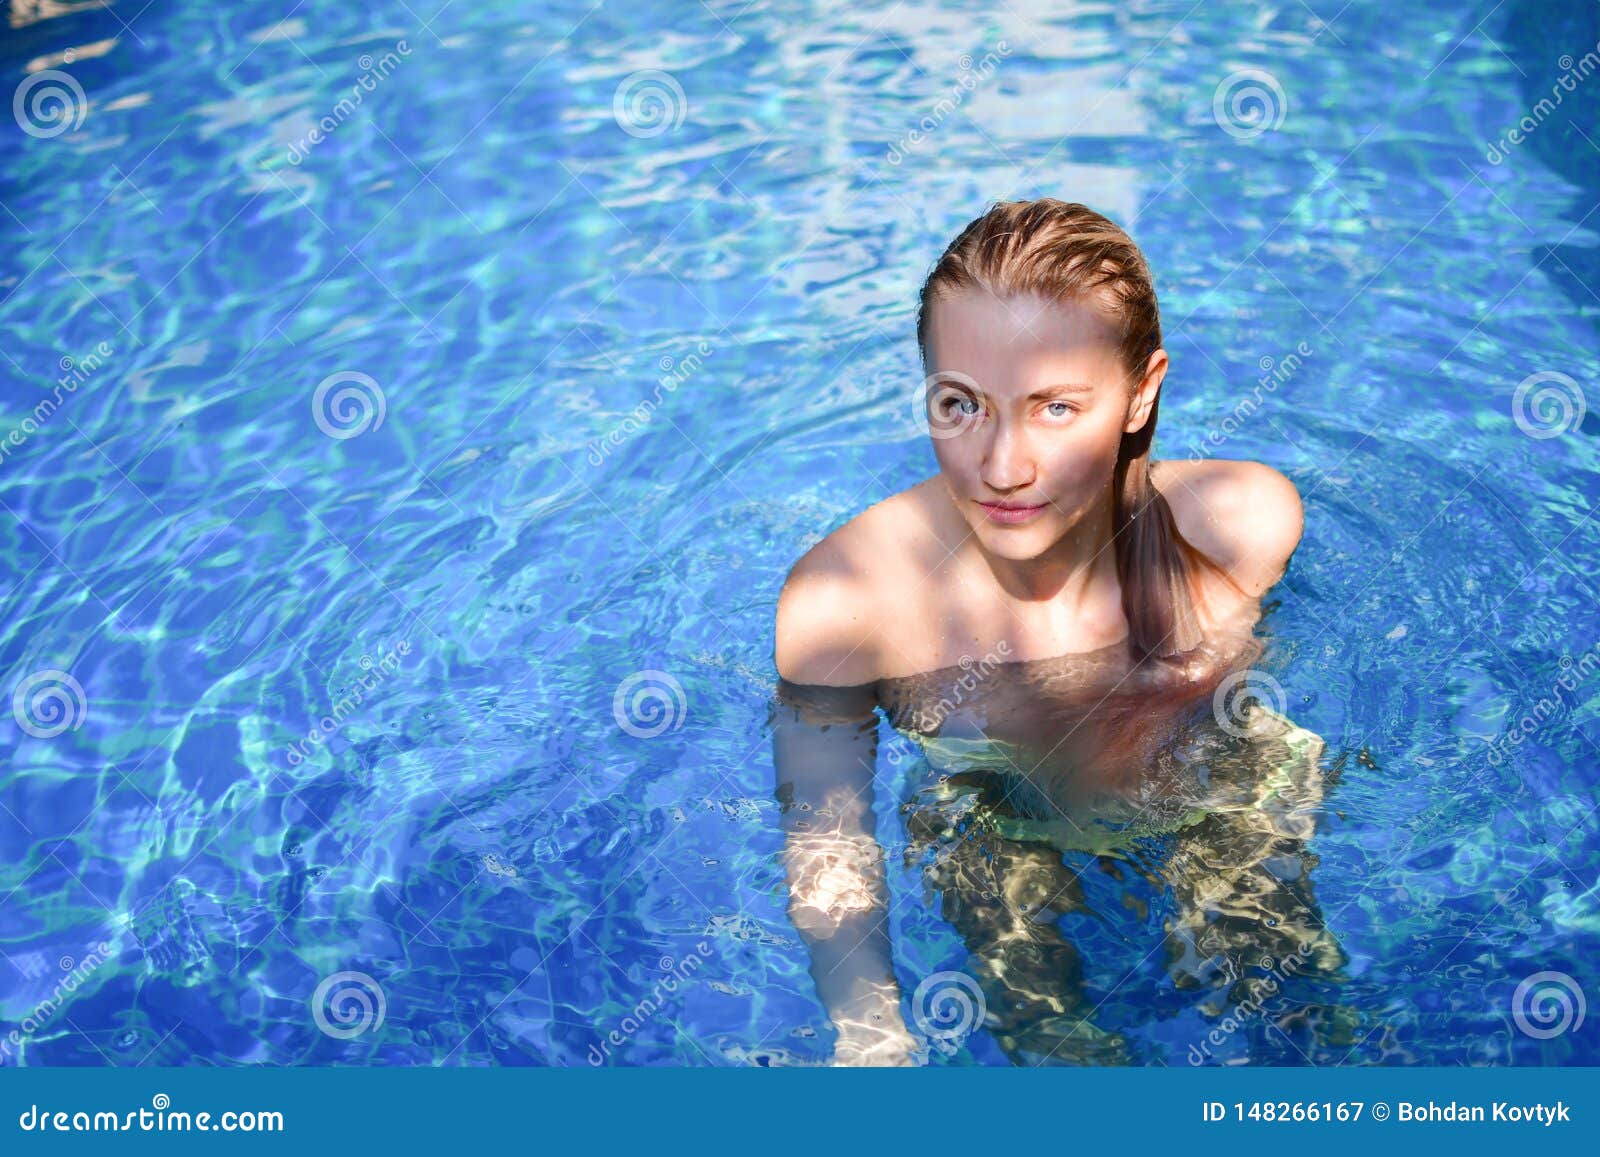 Beauty in the pool